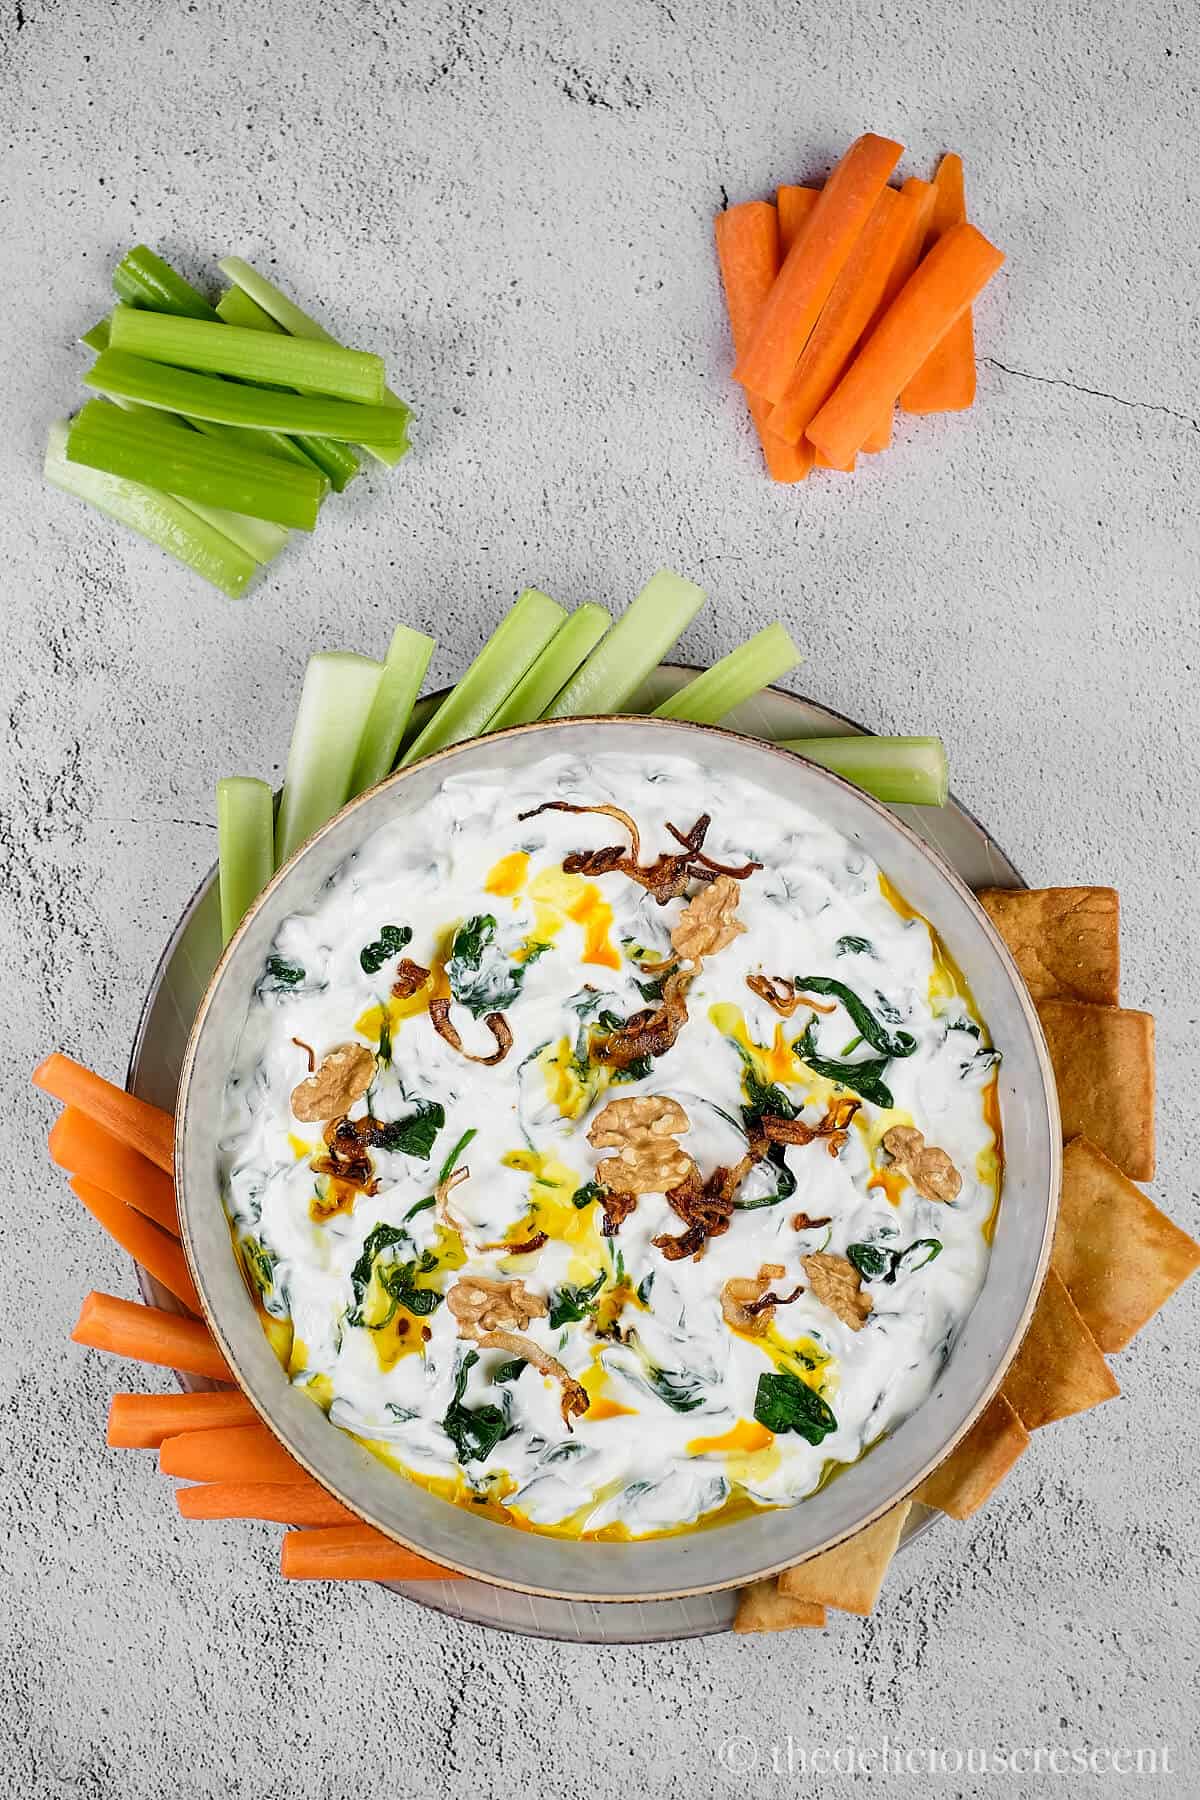 Spinach yogurt dip served with chips and veggies.